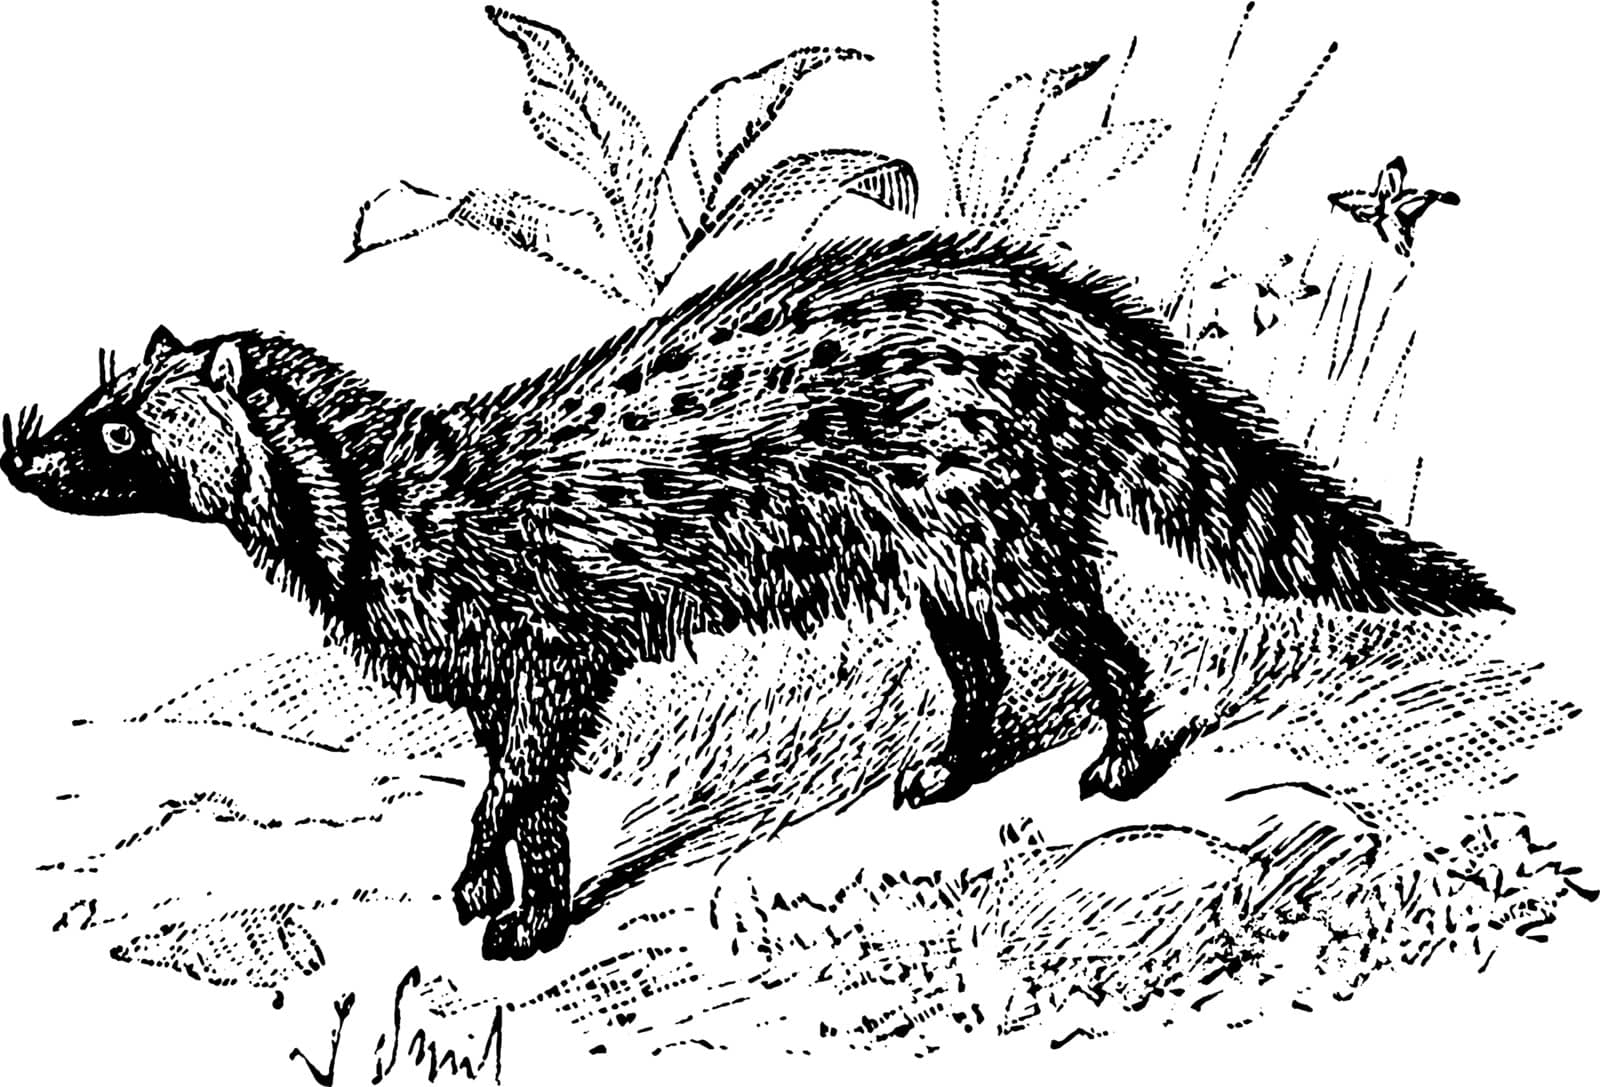 Civet Cat is a small lithe bodied and mostly nocturnal mammal native to tropical Asia and Africa, vintage line drawing or engraving illustration.